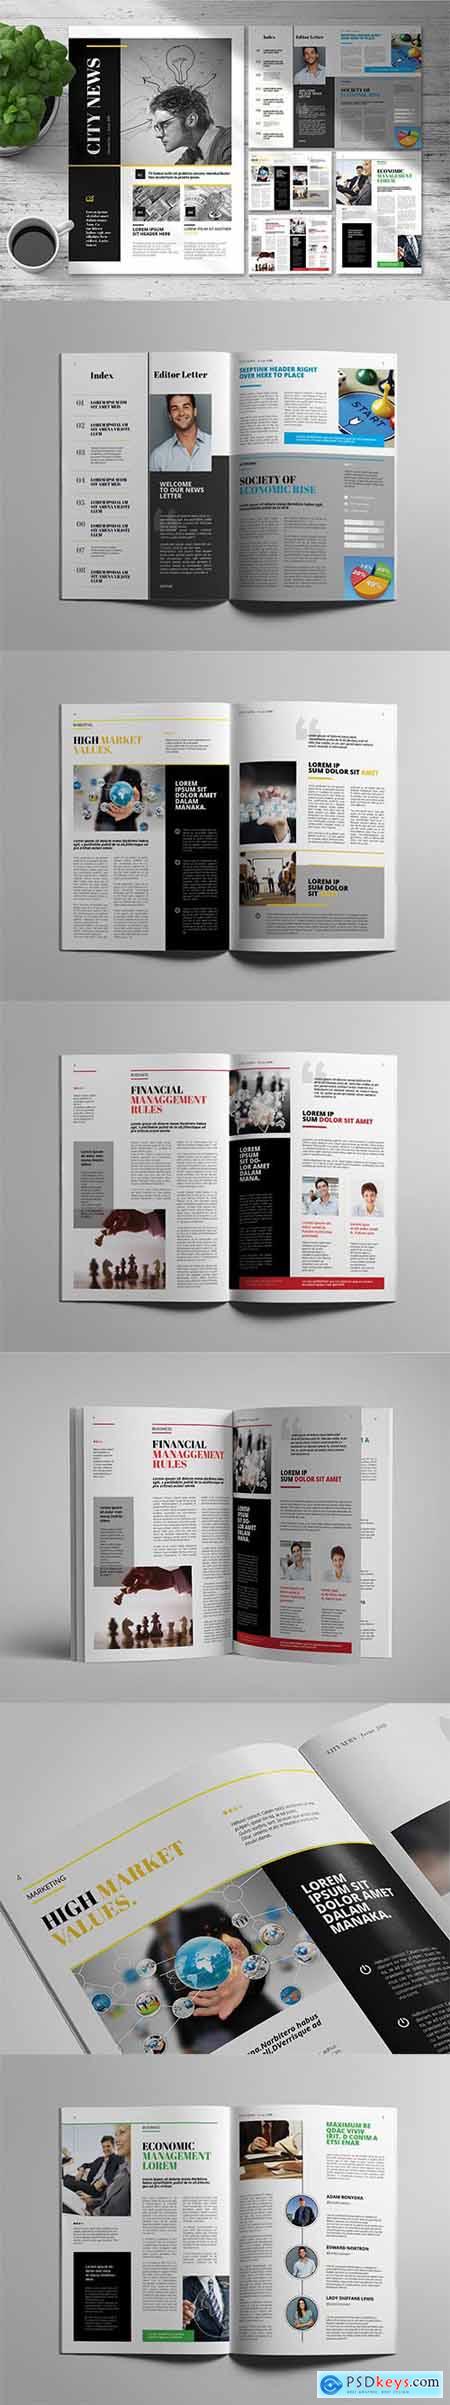 CityNews - Newsletter Template » Free Download Photoshop Vector Stock ...